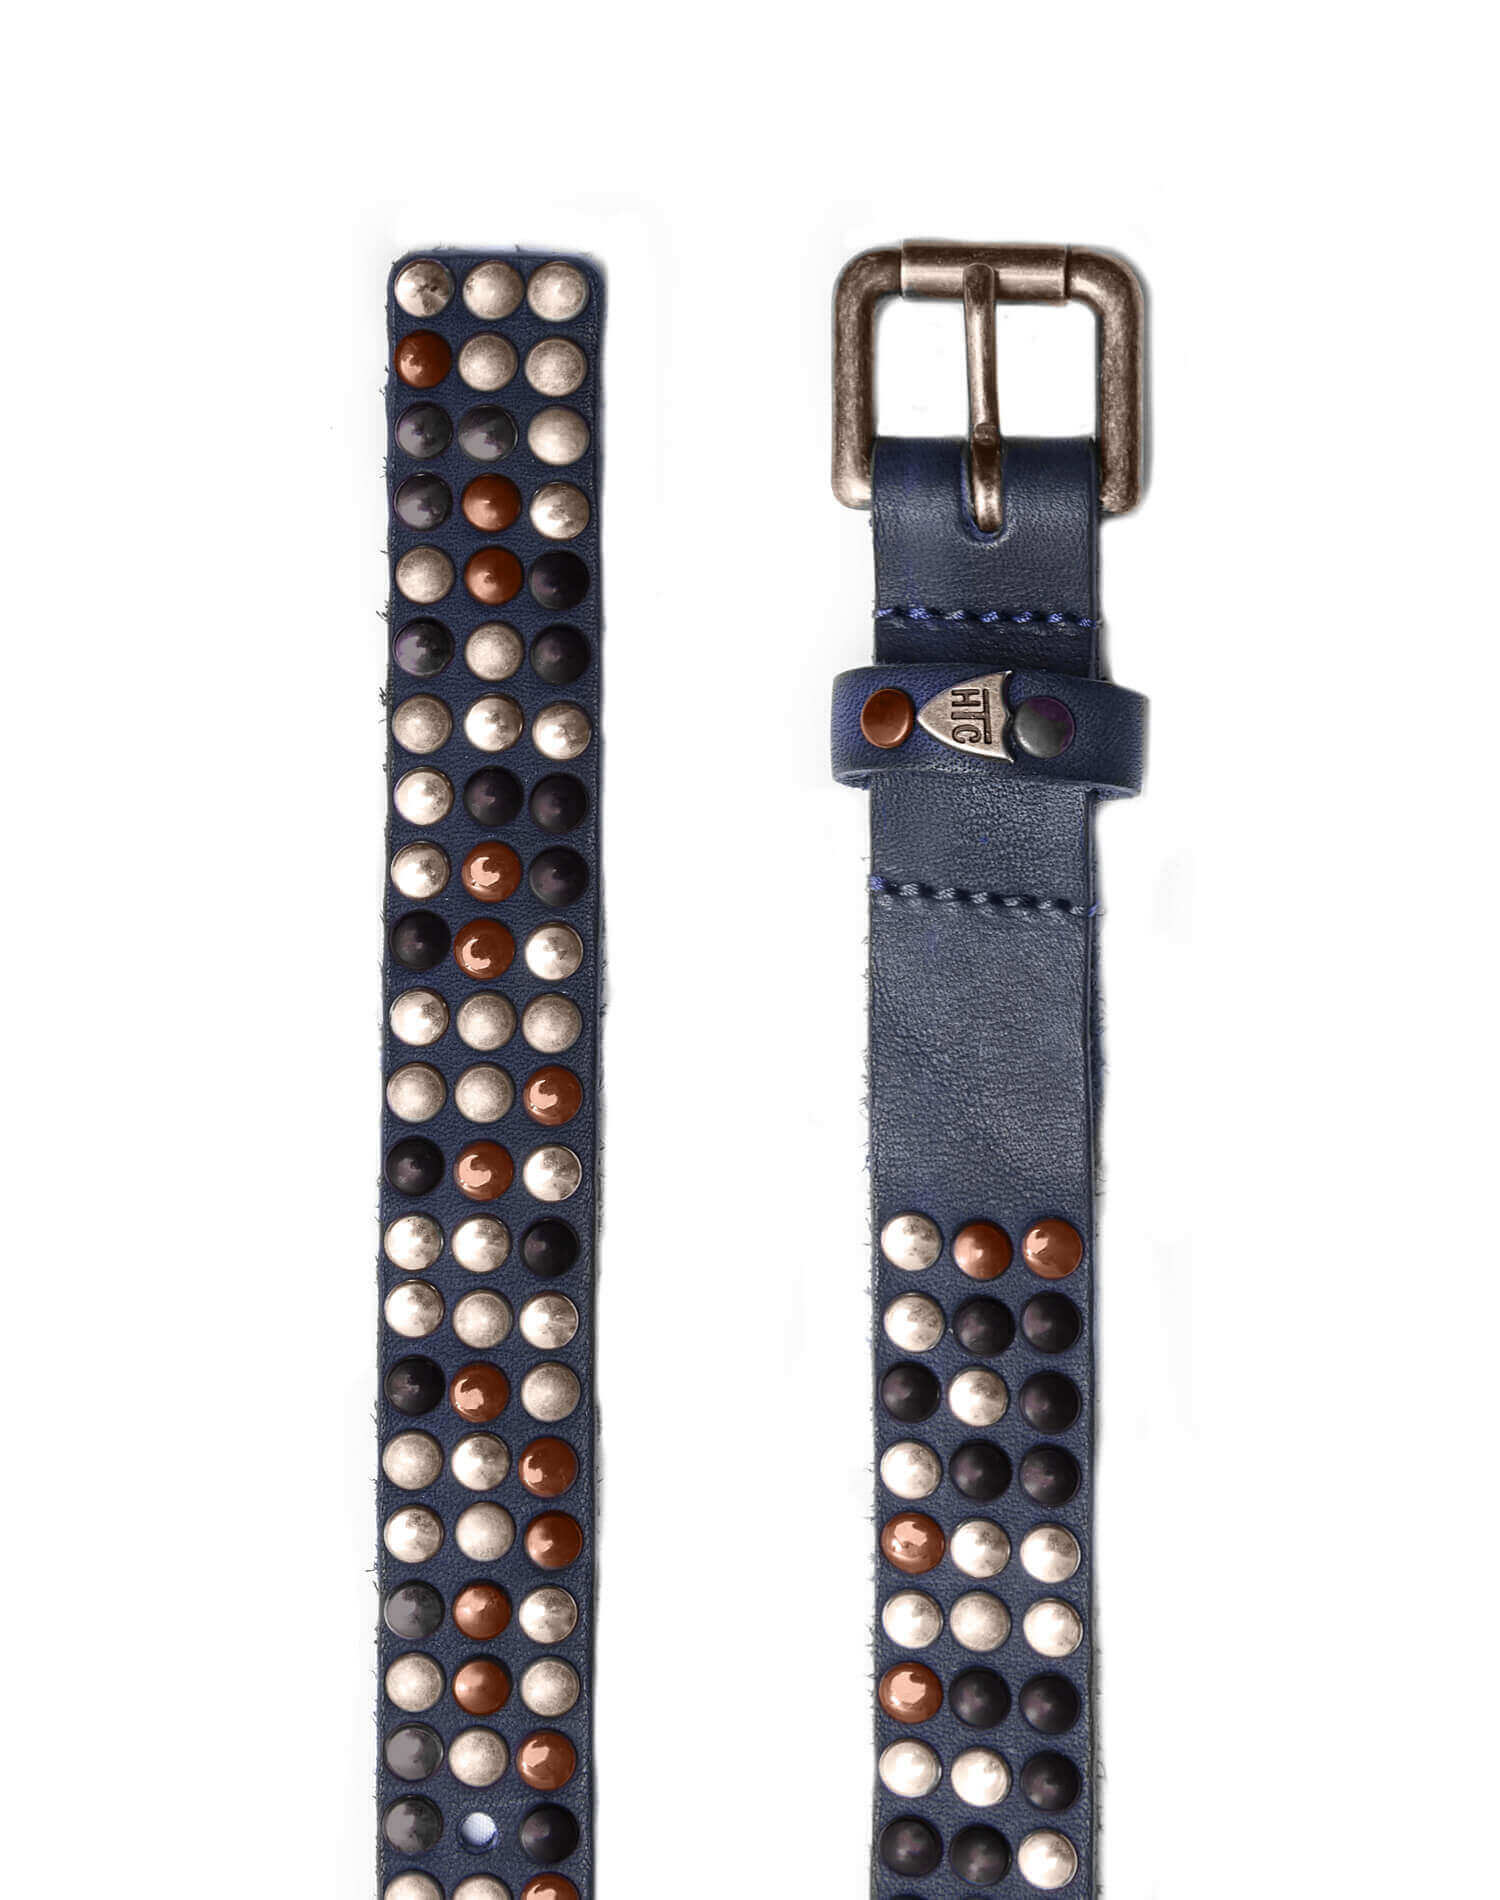 3.000 STUDS COLOR BELT Blue leather belt with studs, brass buckle, studded zamac belt loop and rivet with HTC logo. Height: 2 cm. Made in Italy. HTC LOS ANGELES